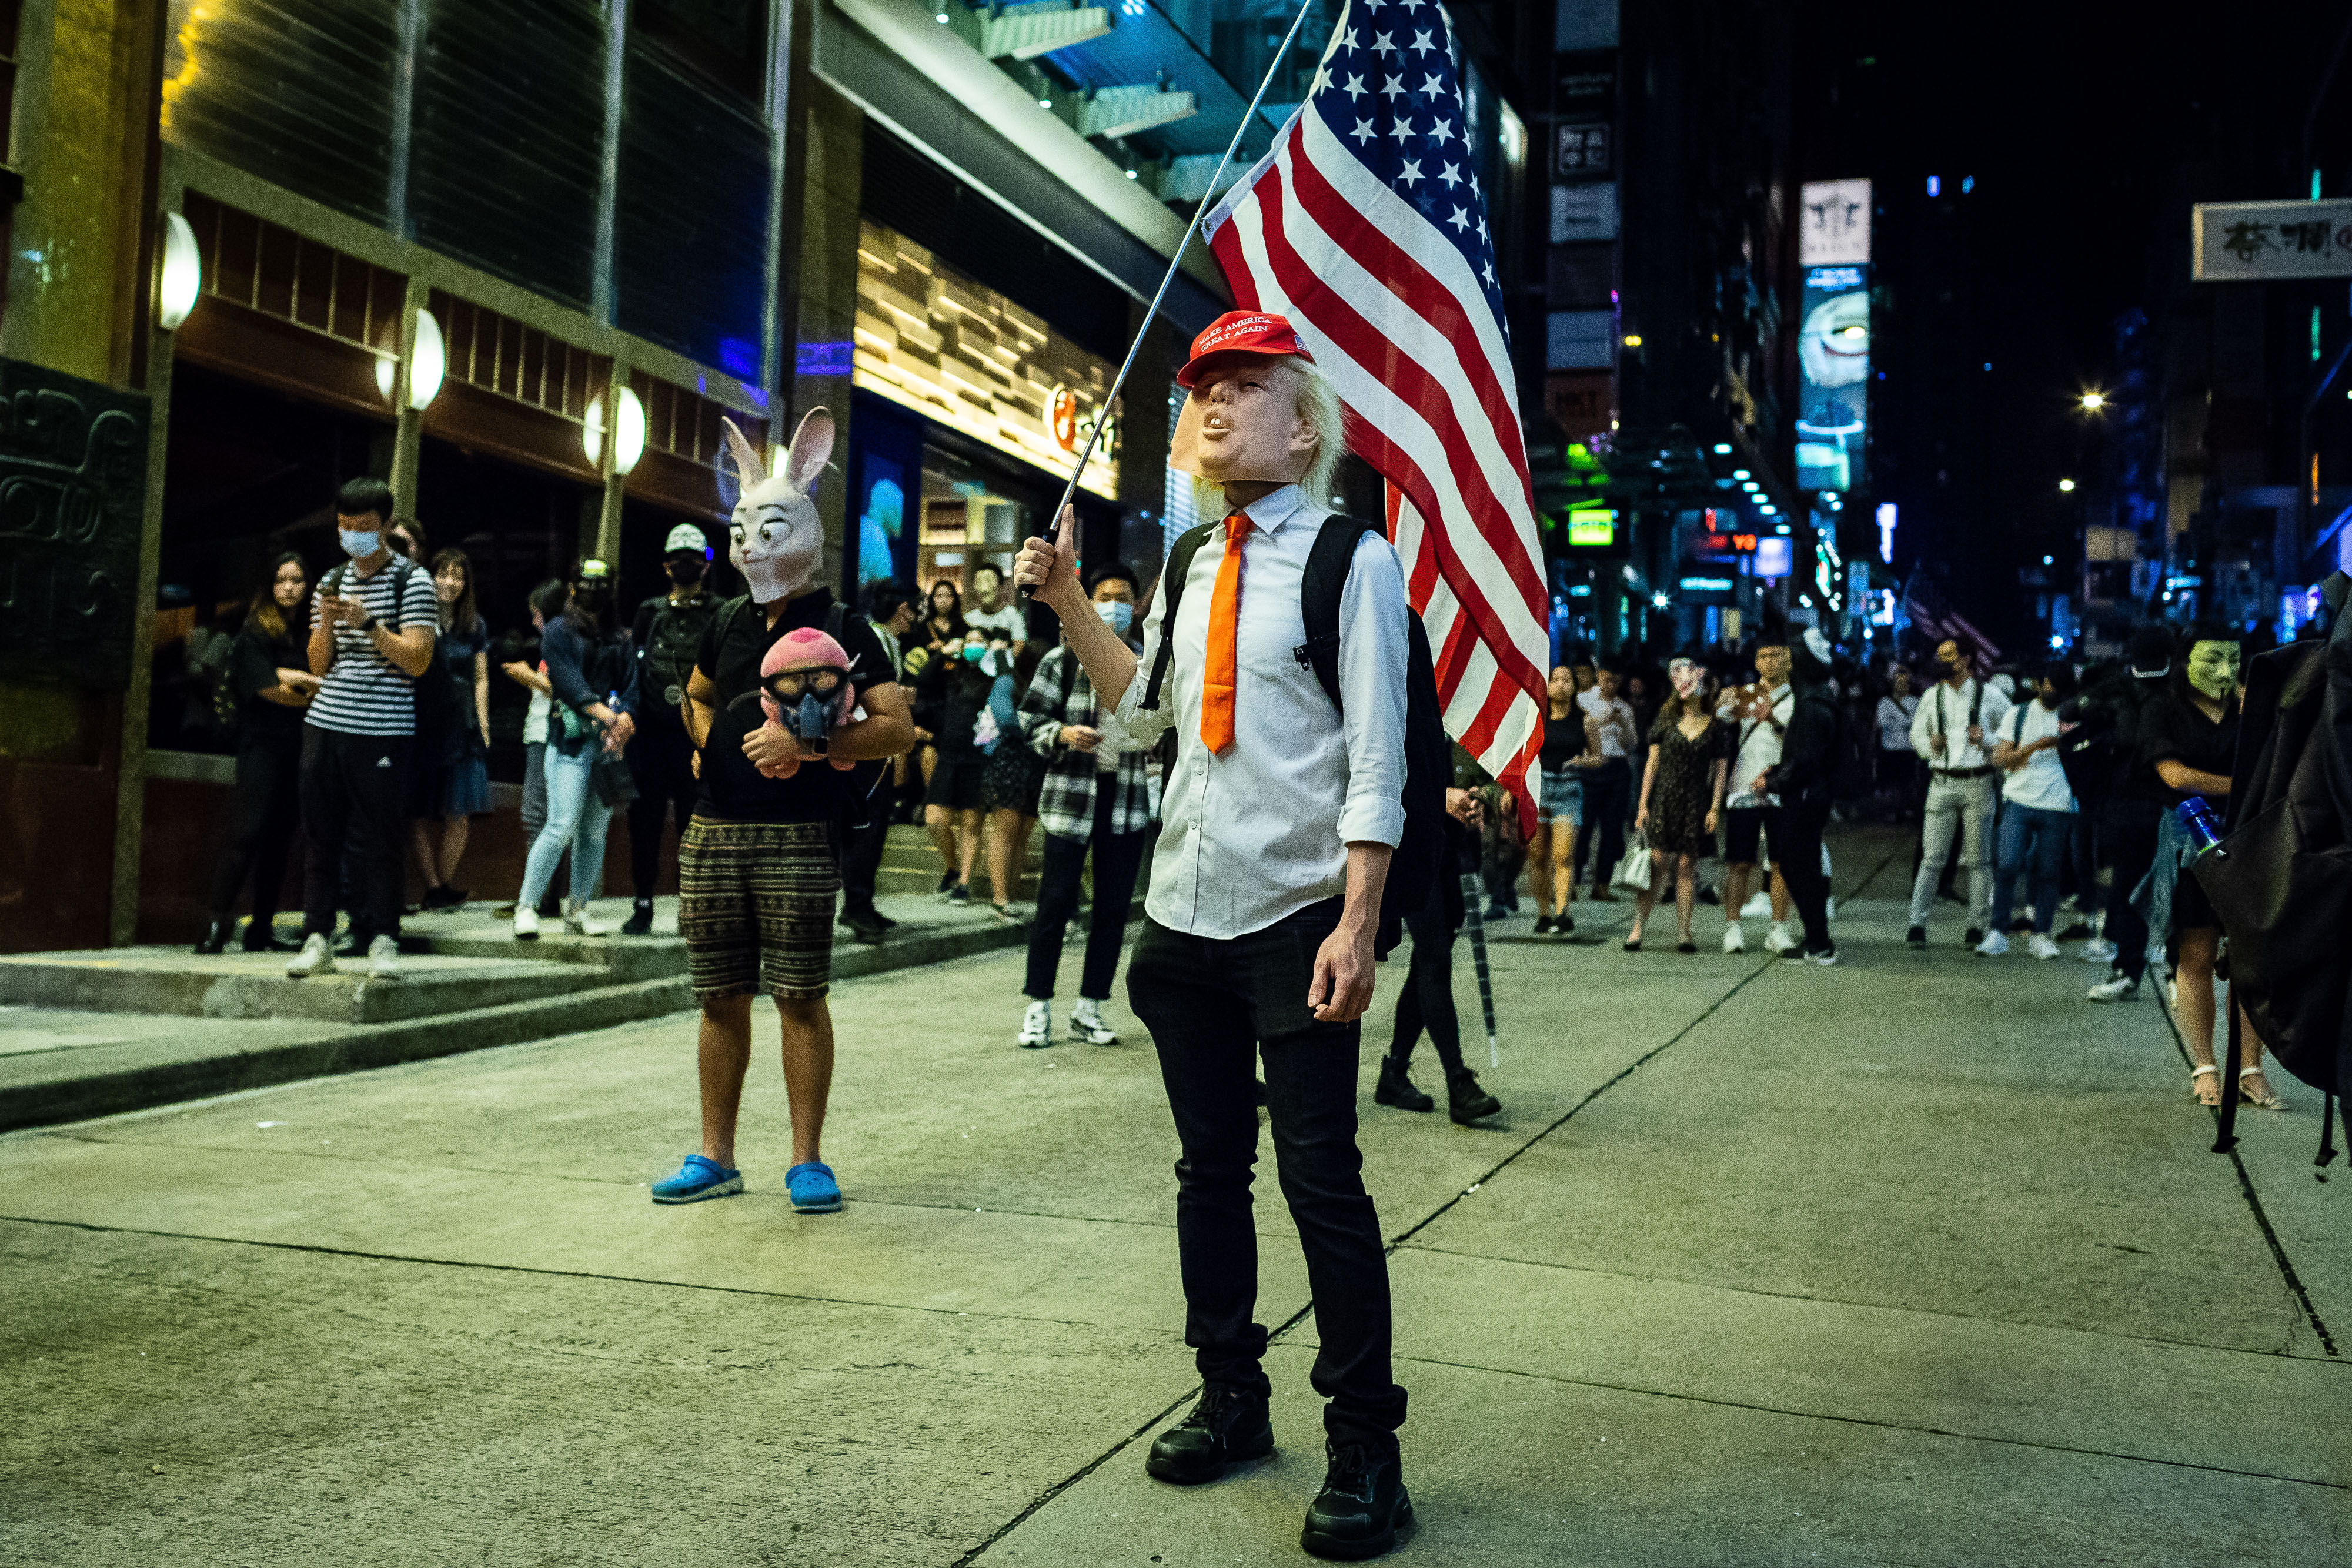 A demonstrator wears a Donald Trump mask while holding a U.S. flag in the Lan Kwai Fong area of Hong Kong, China, on Thursday, Oct. 31, 2019. Efforts by Hong Kongs authorities to quell the pr